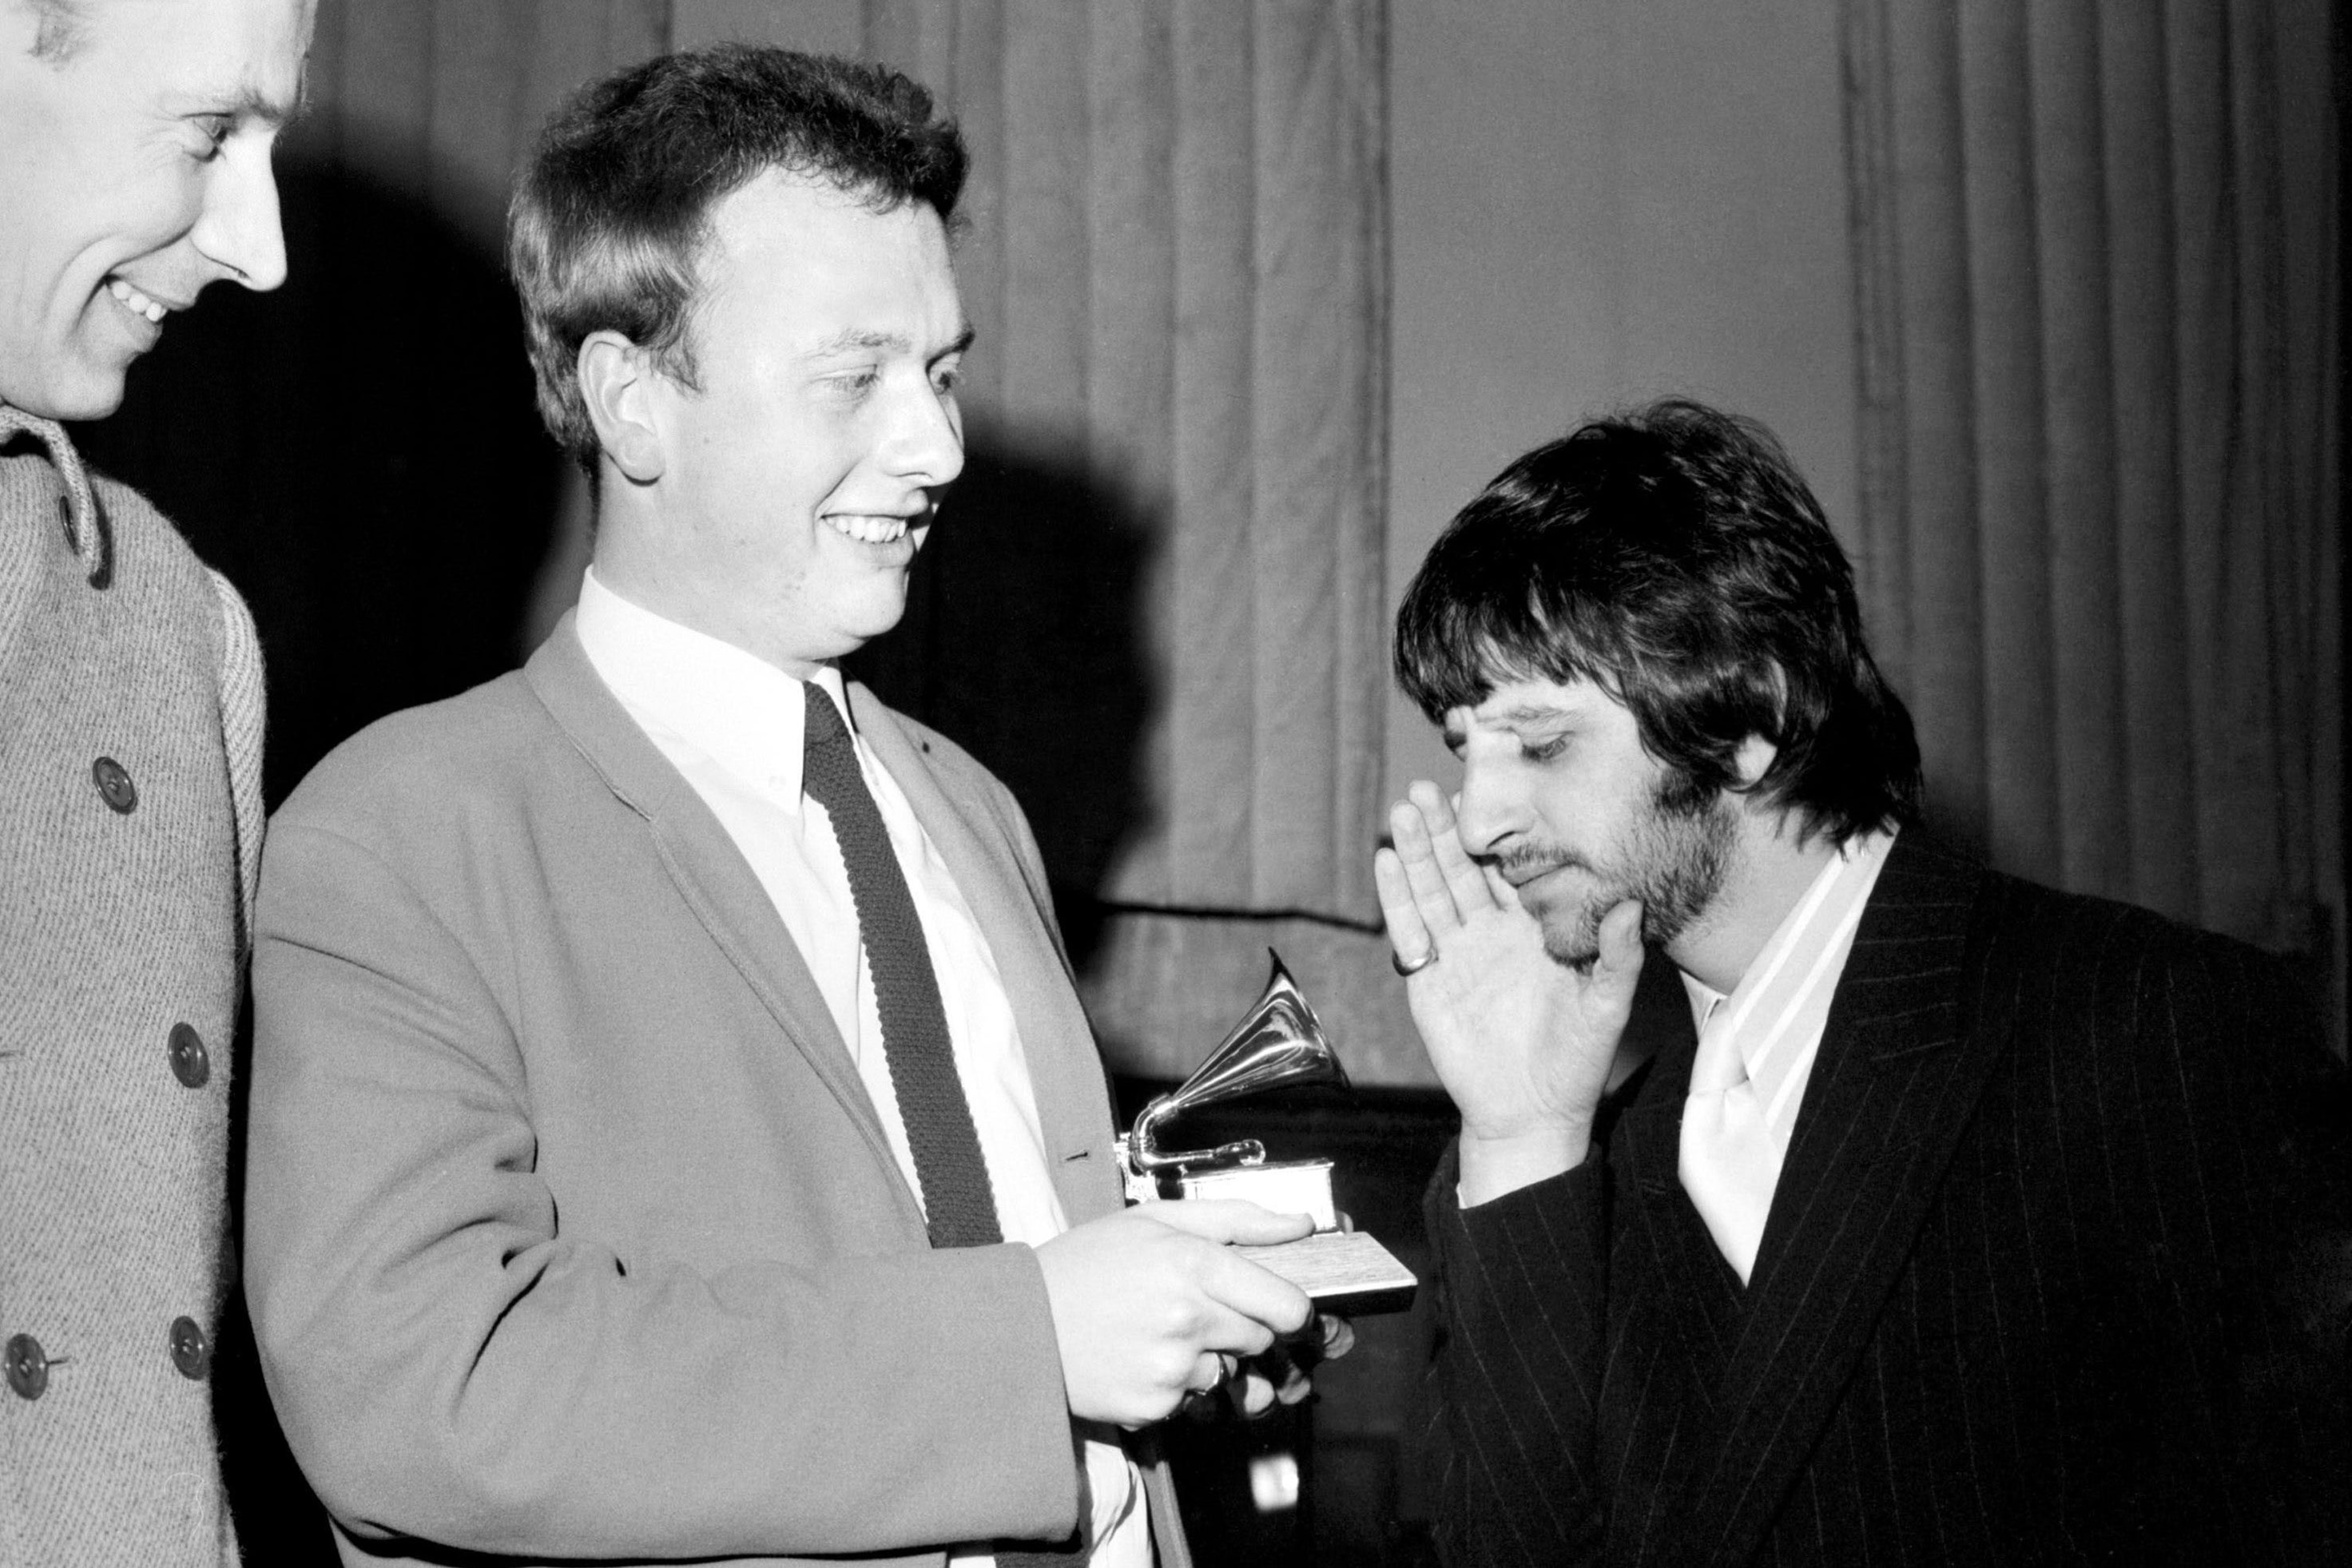 Geoff Emerick, Ringo Starr, and Emerick’s Grammy for Sgt. Pepper’s Lonely Hearts Club Band in 1968.